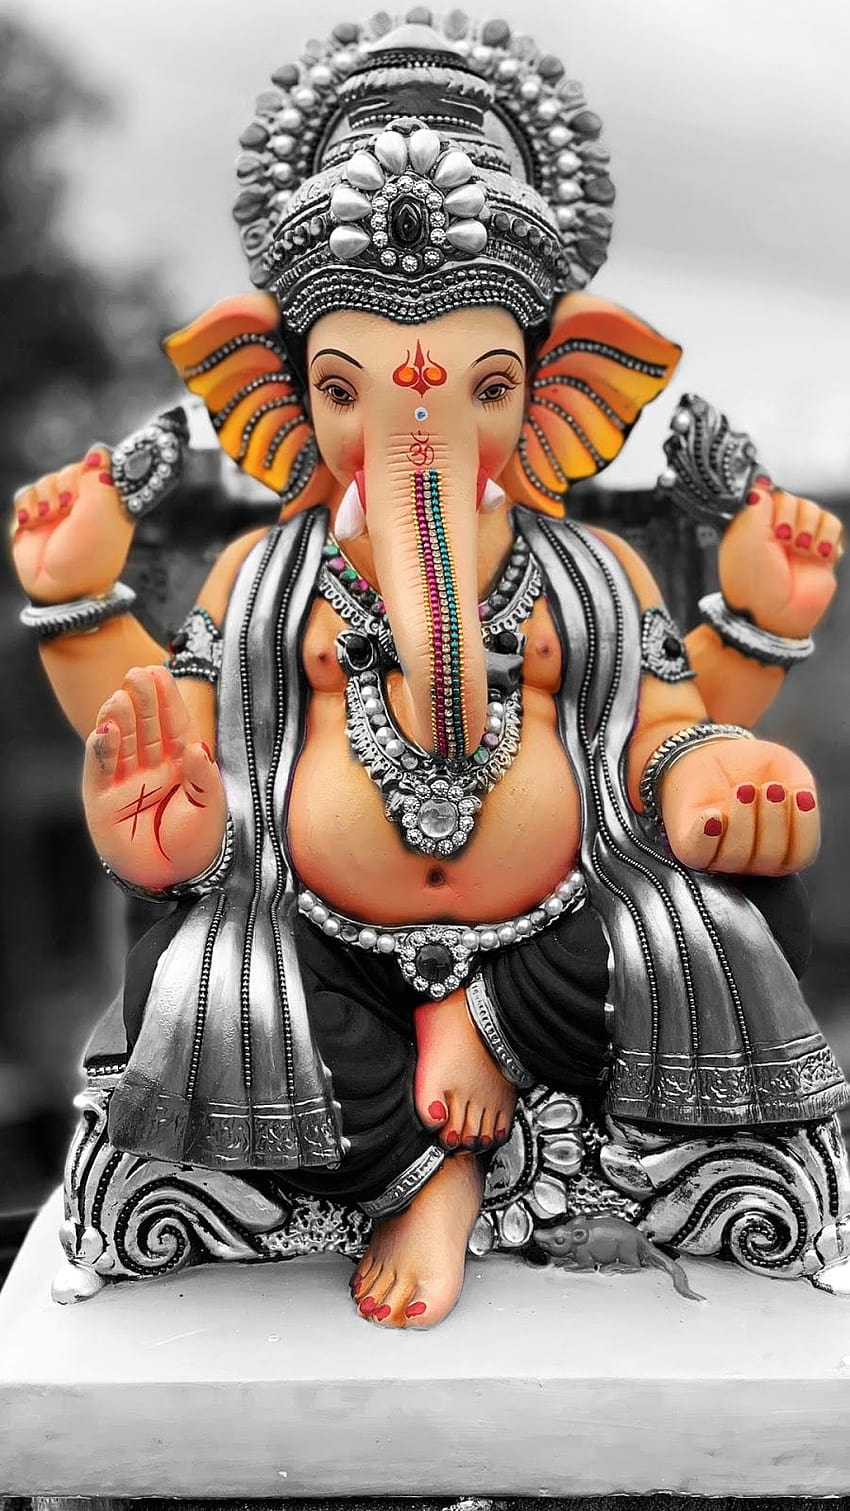 Happy Ganesh Chaturthi 2021 Wishes, Quotes, Messages, Wallpaper, Greetings,  Status for WhatsApp, Facebook and Instagram